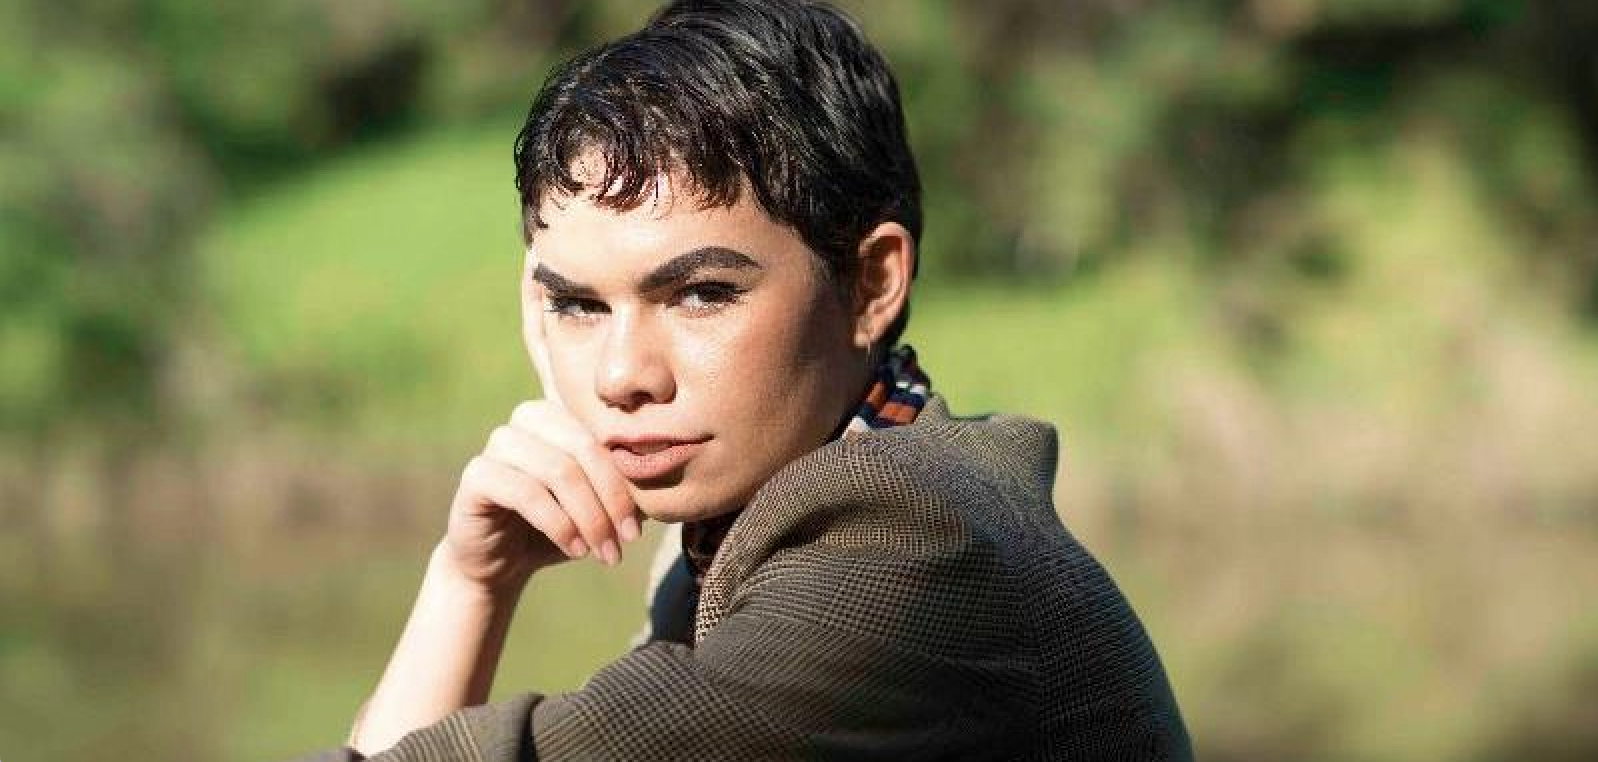 The activist who could be Australia’s first queer and Indigenous PM